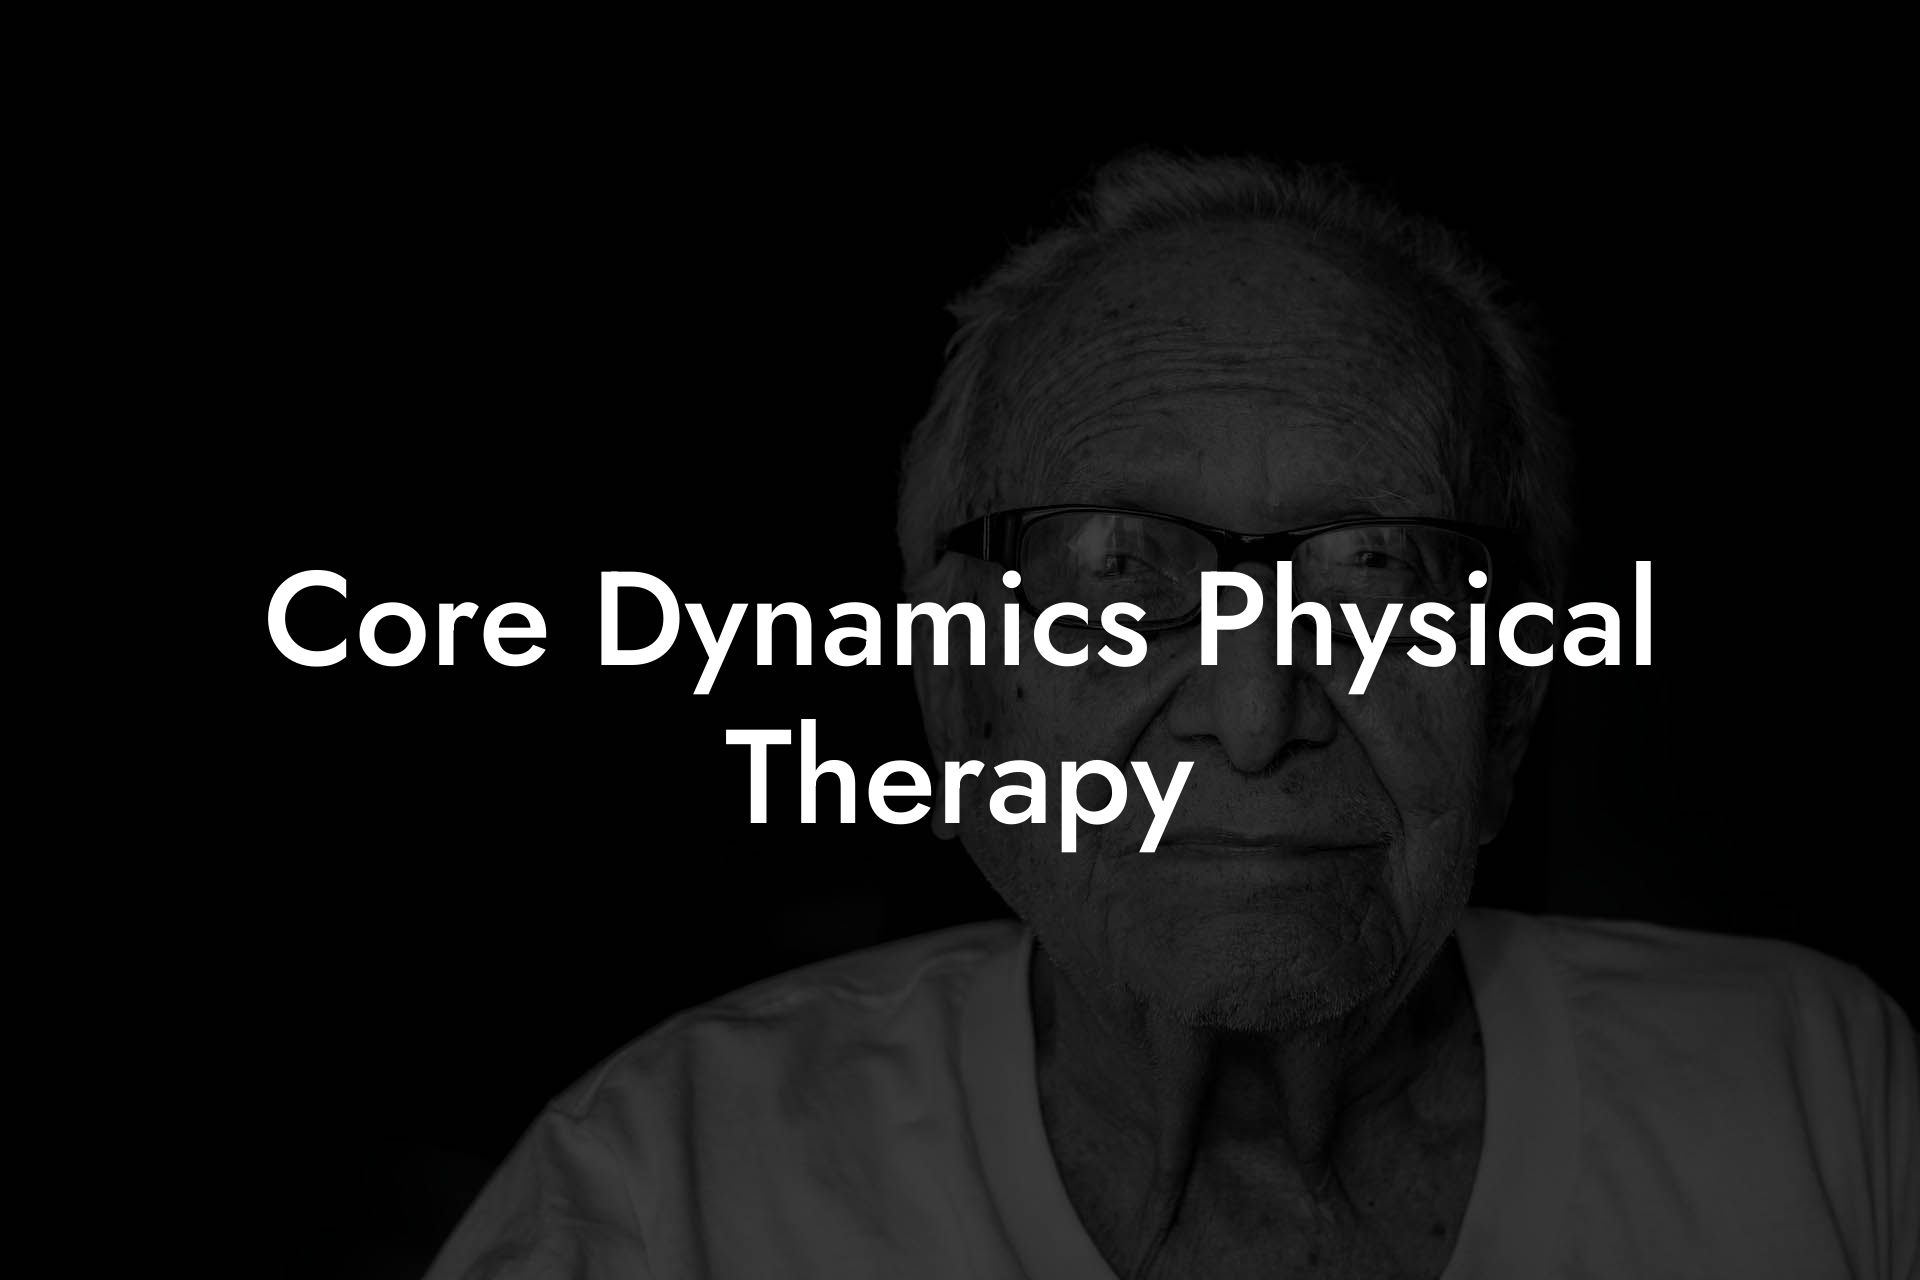 Core Dynamics Physical Therapy